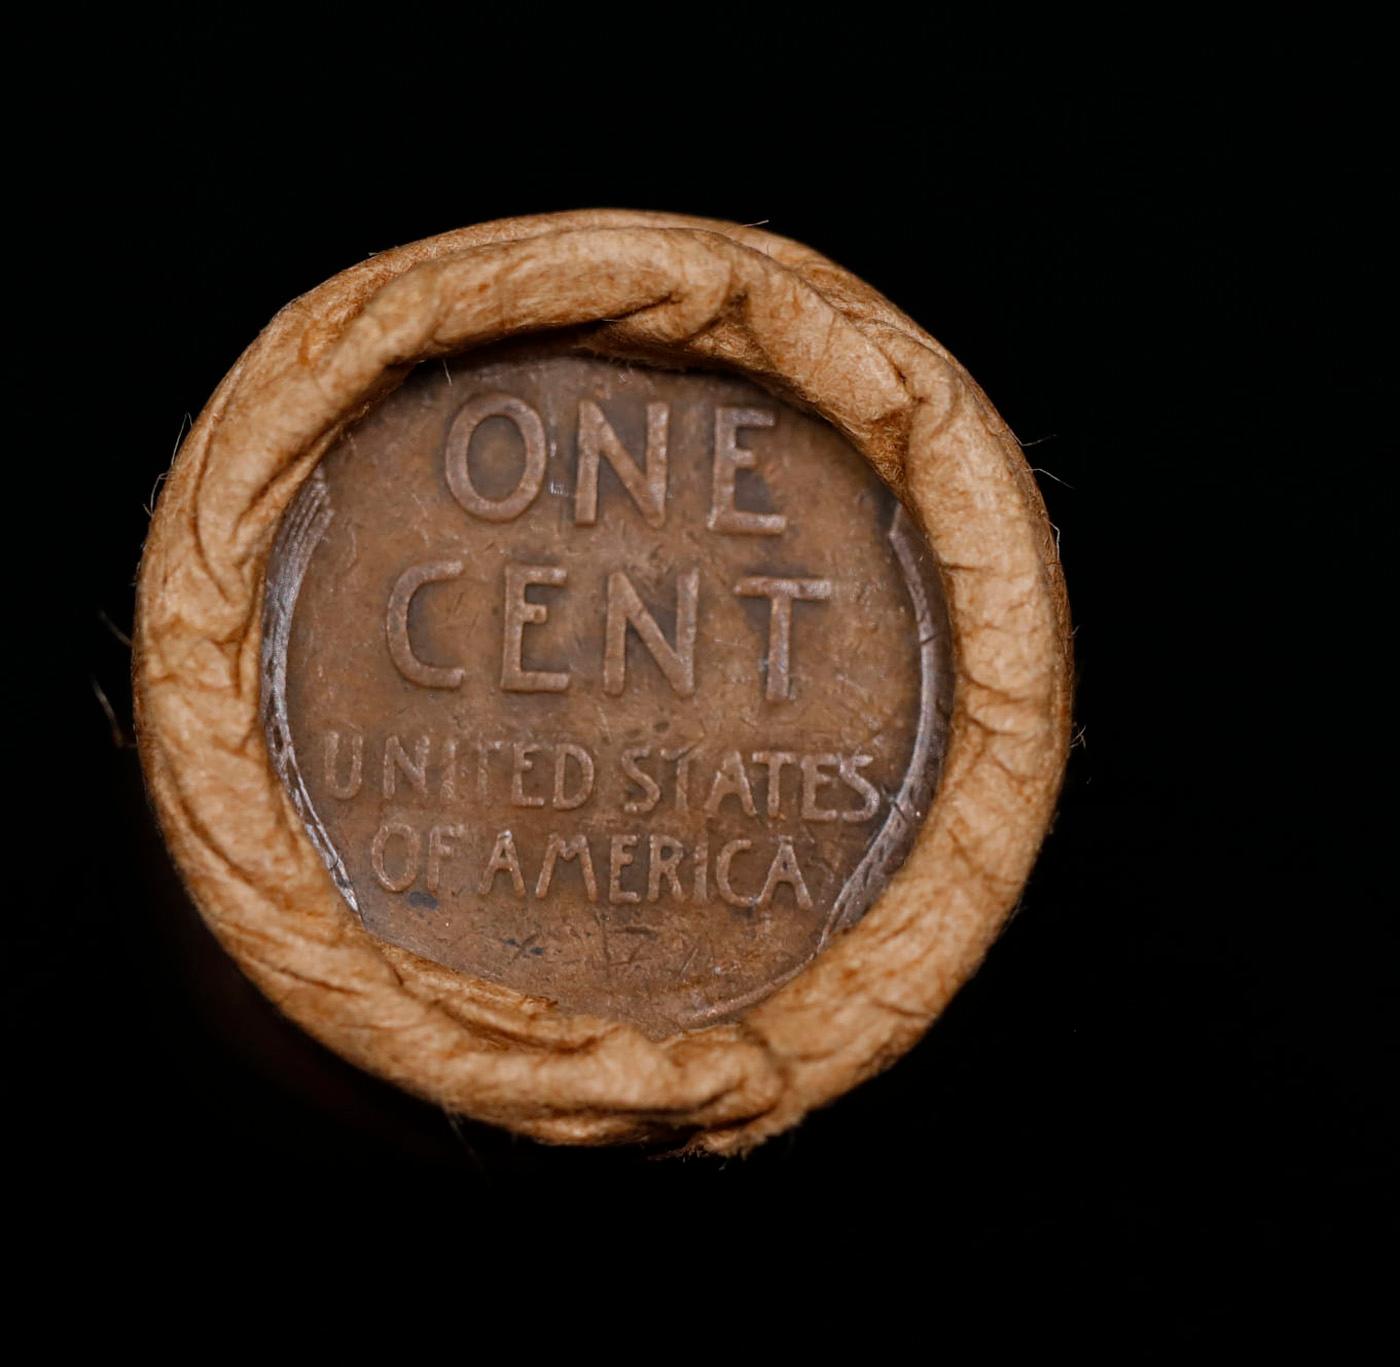 Lincoln Wheat Cent 1c Mixed Roll Orig Brandt McDonalds Wrapper, 1924-p end, Wheat other end